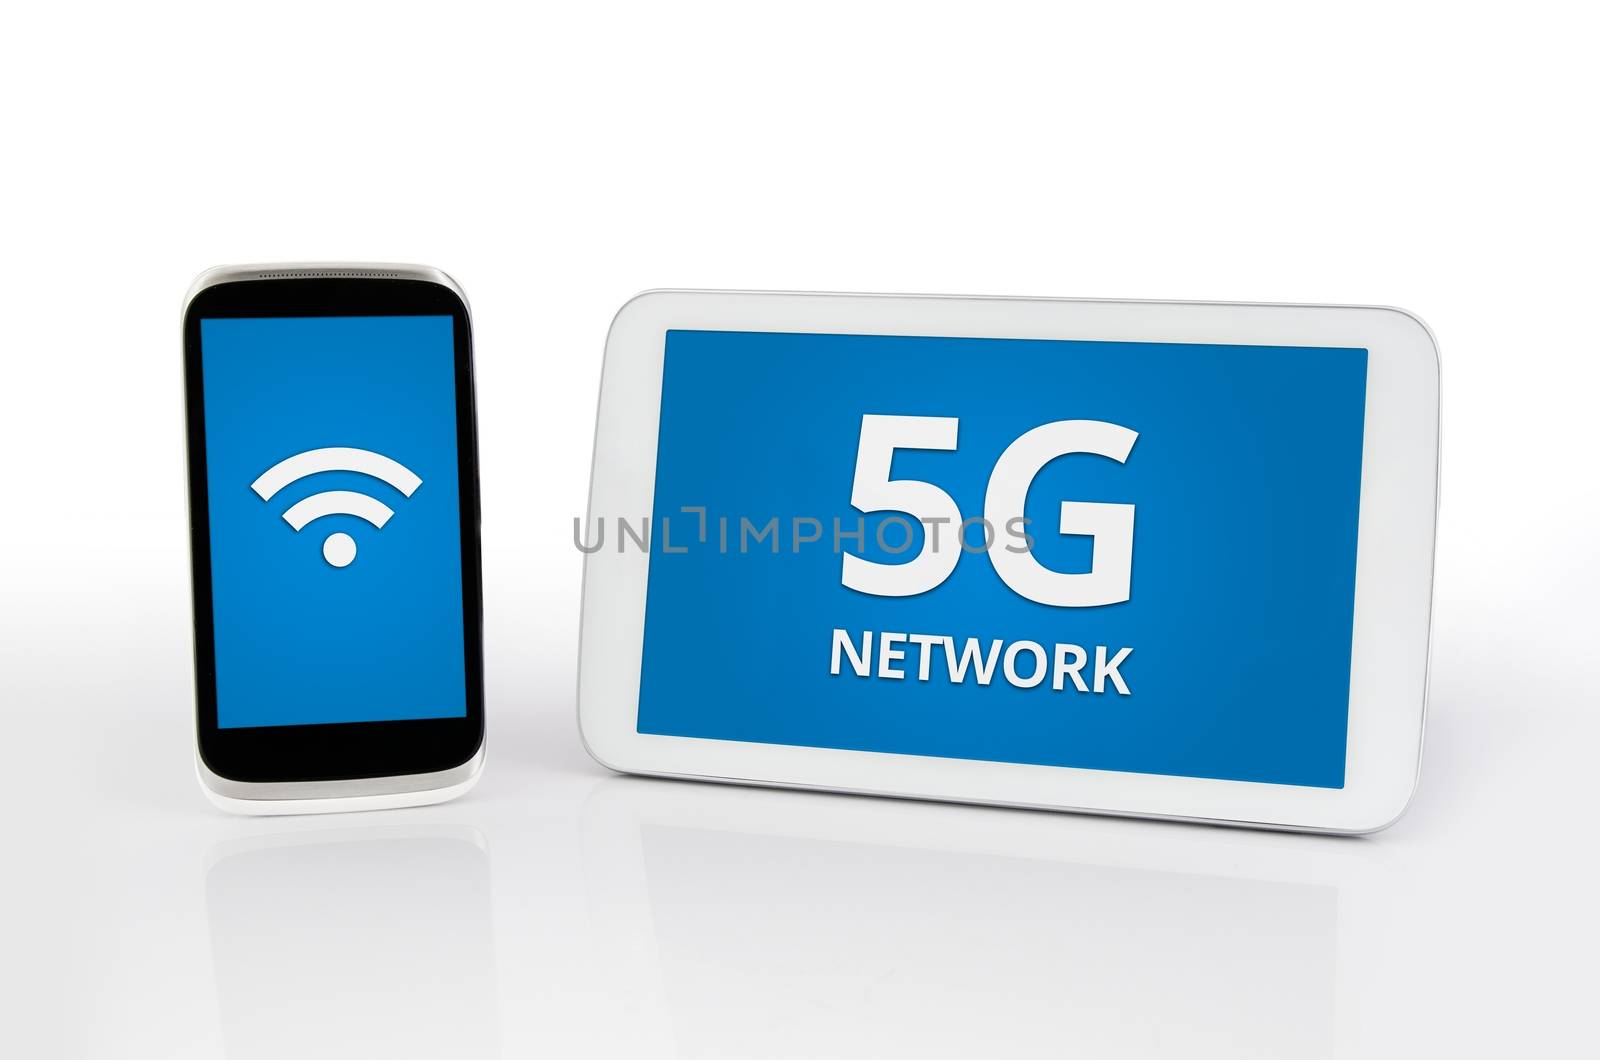 Mobile devices with 5G network standard communication by simpson33